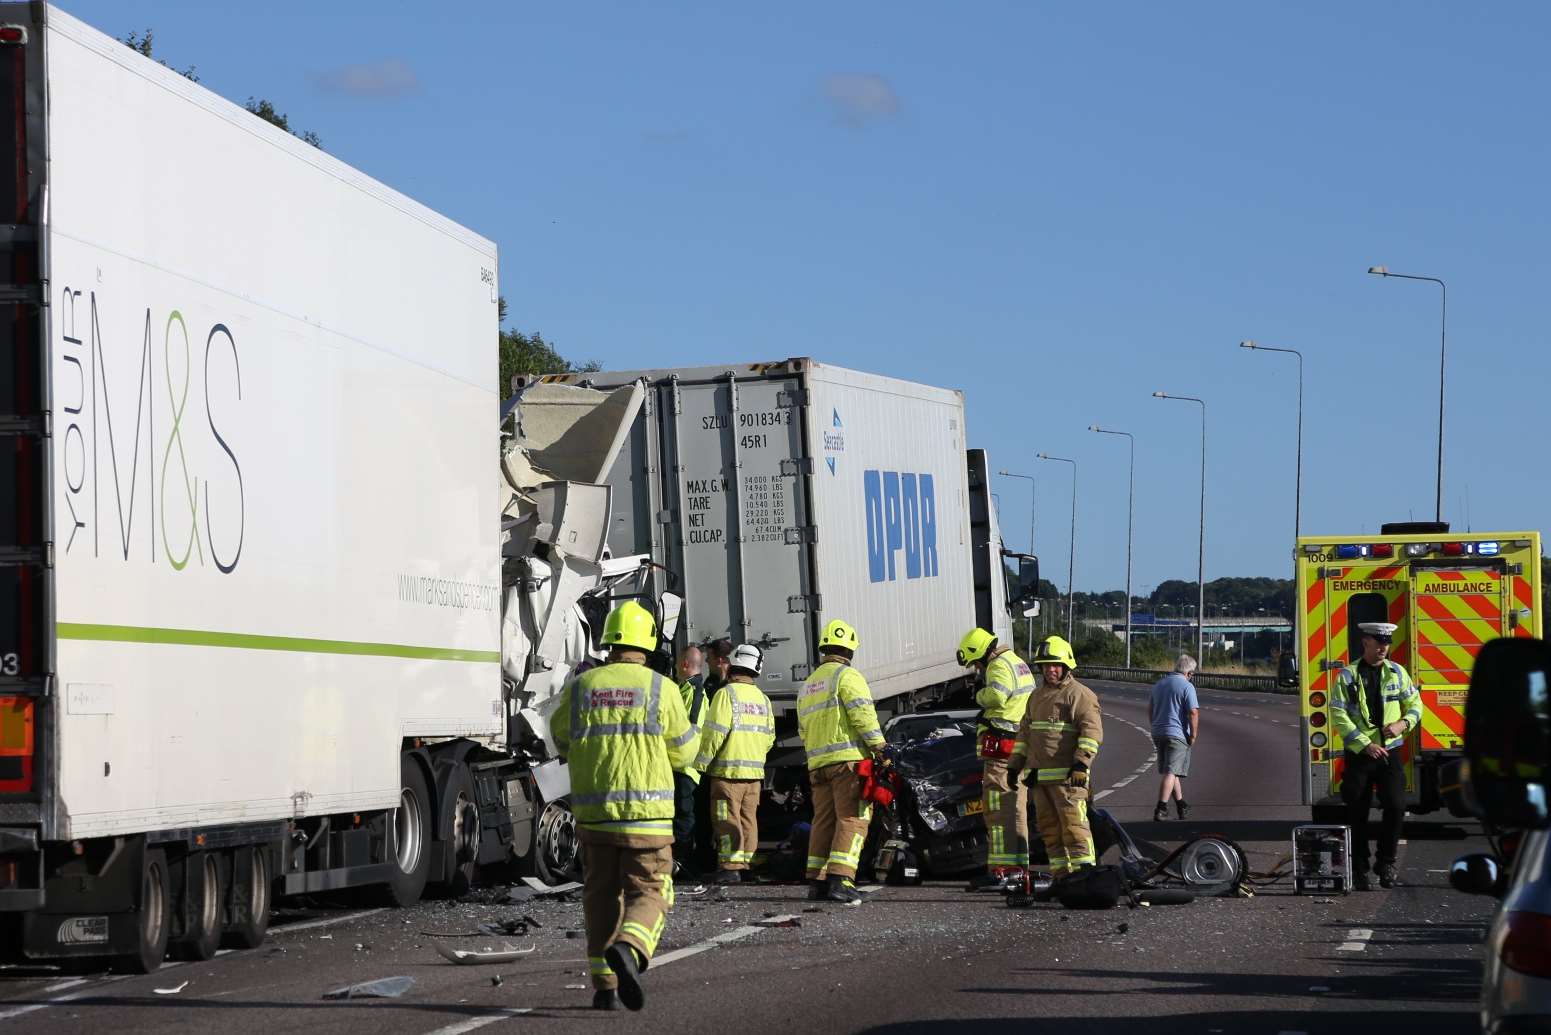 Fire crews at the scene of the fatal crash on the M2. Picture: Andy James/photo3.co.uk